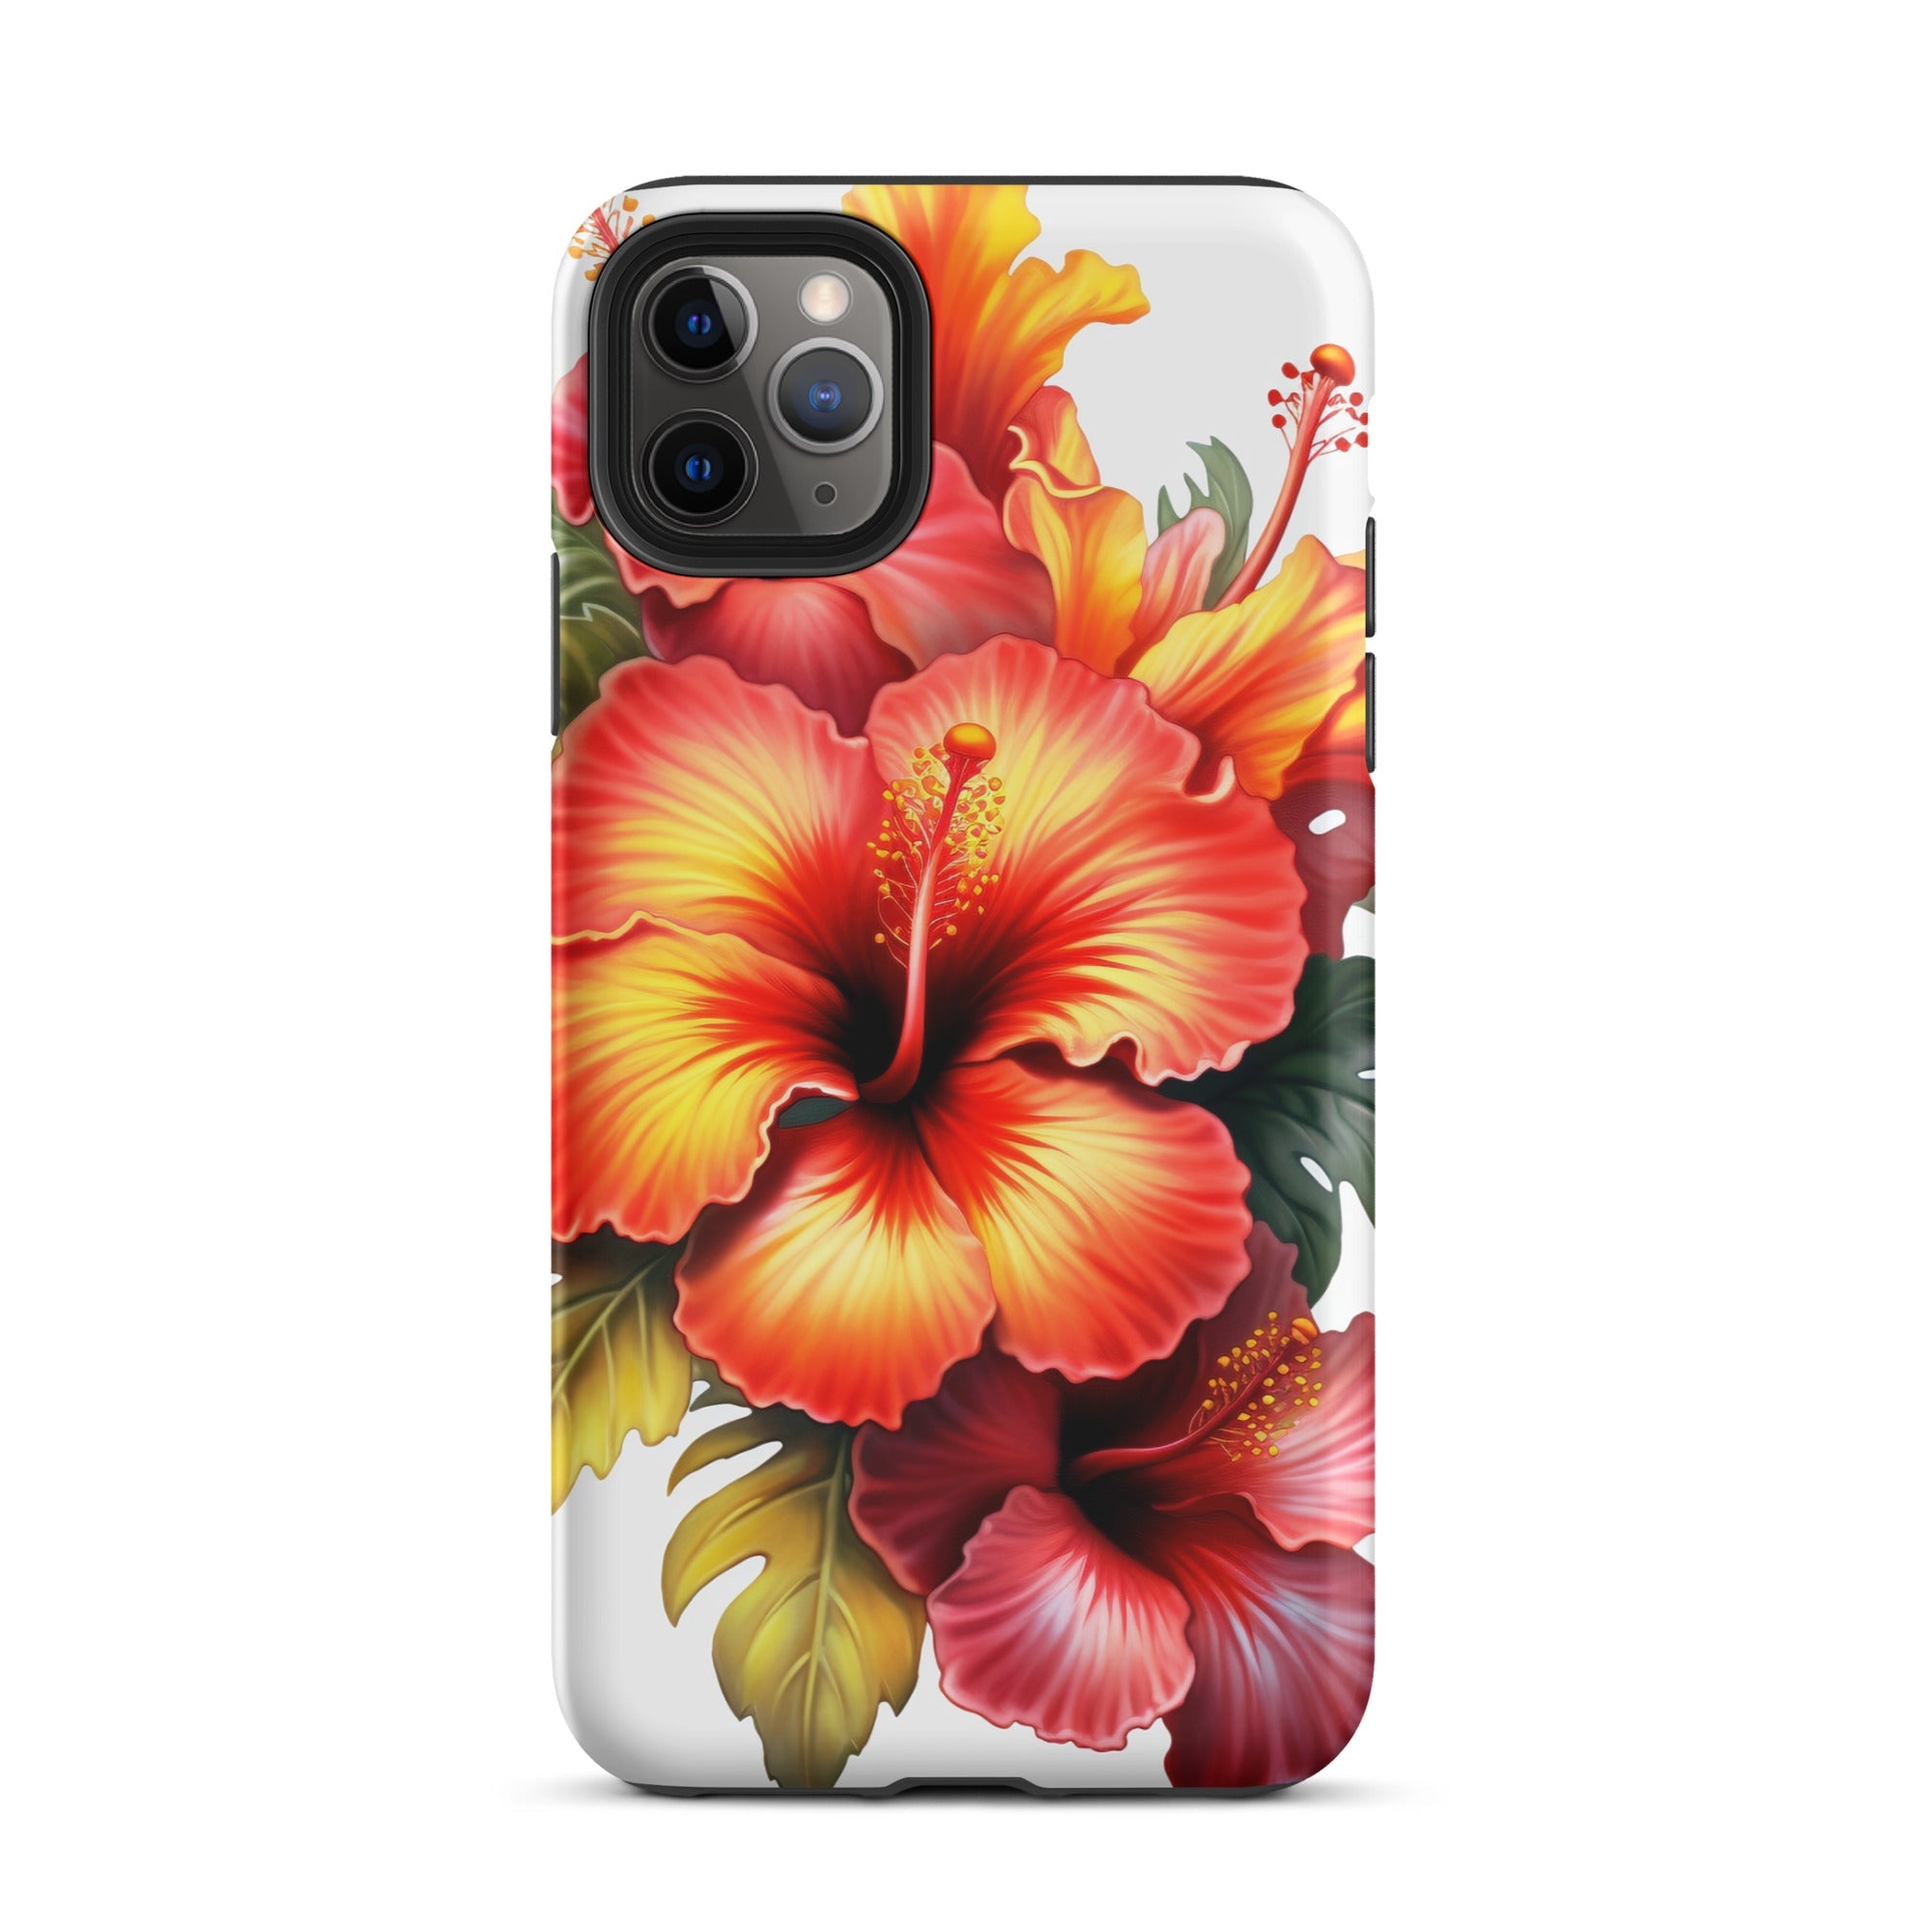 Hibiscus Flower iPhone Case by Visual Verse - Image 6